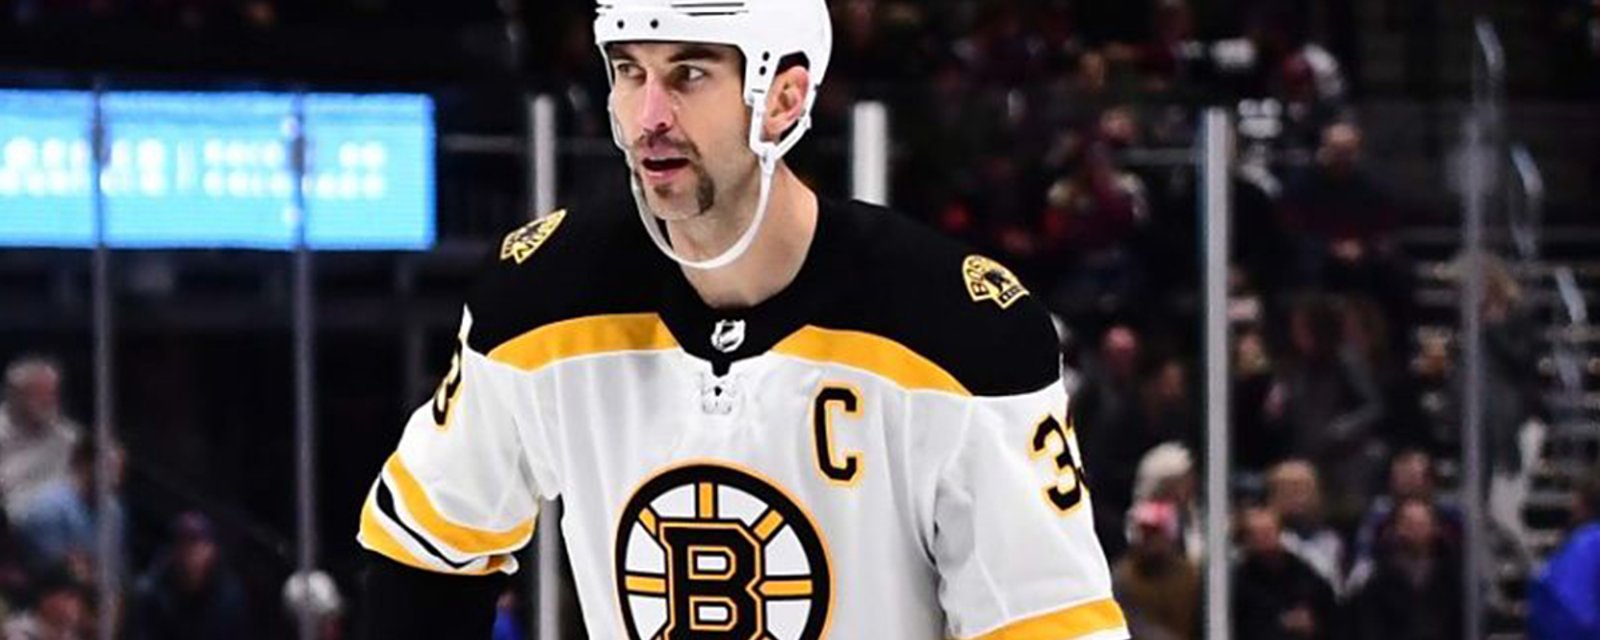 Breaking: Chara injury forces Bruins to make AHL call up